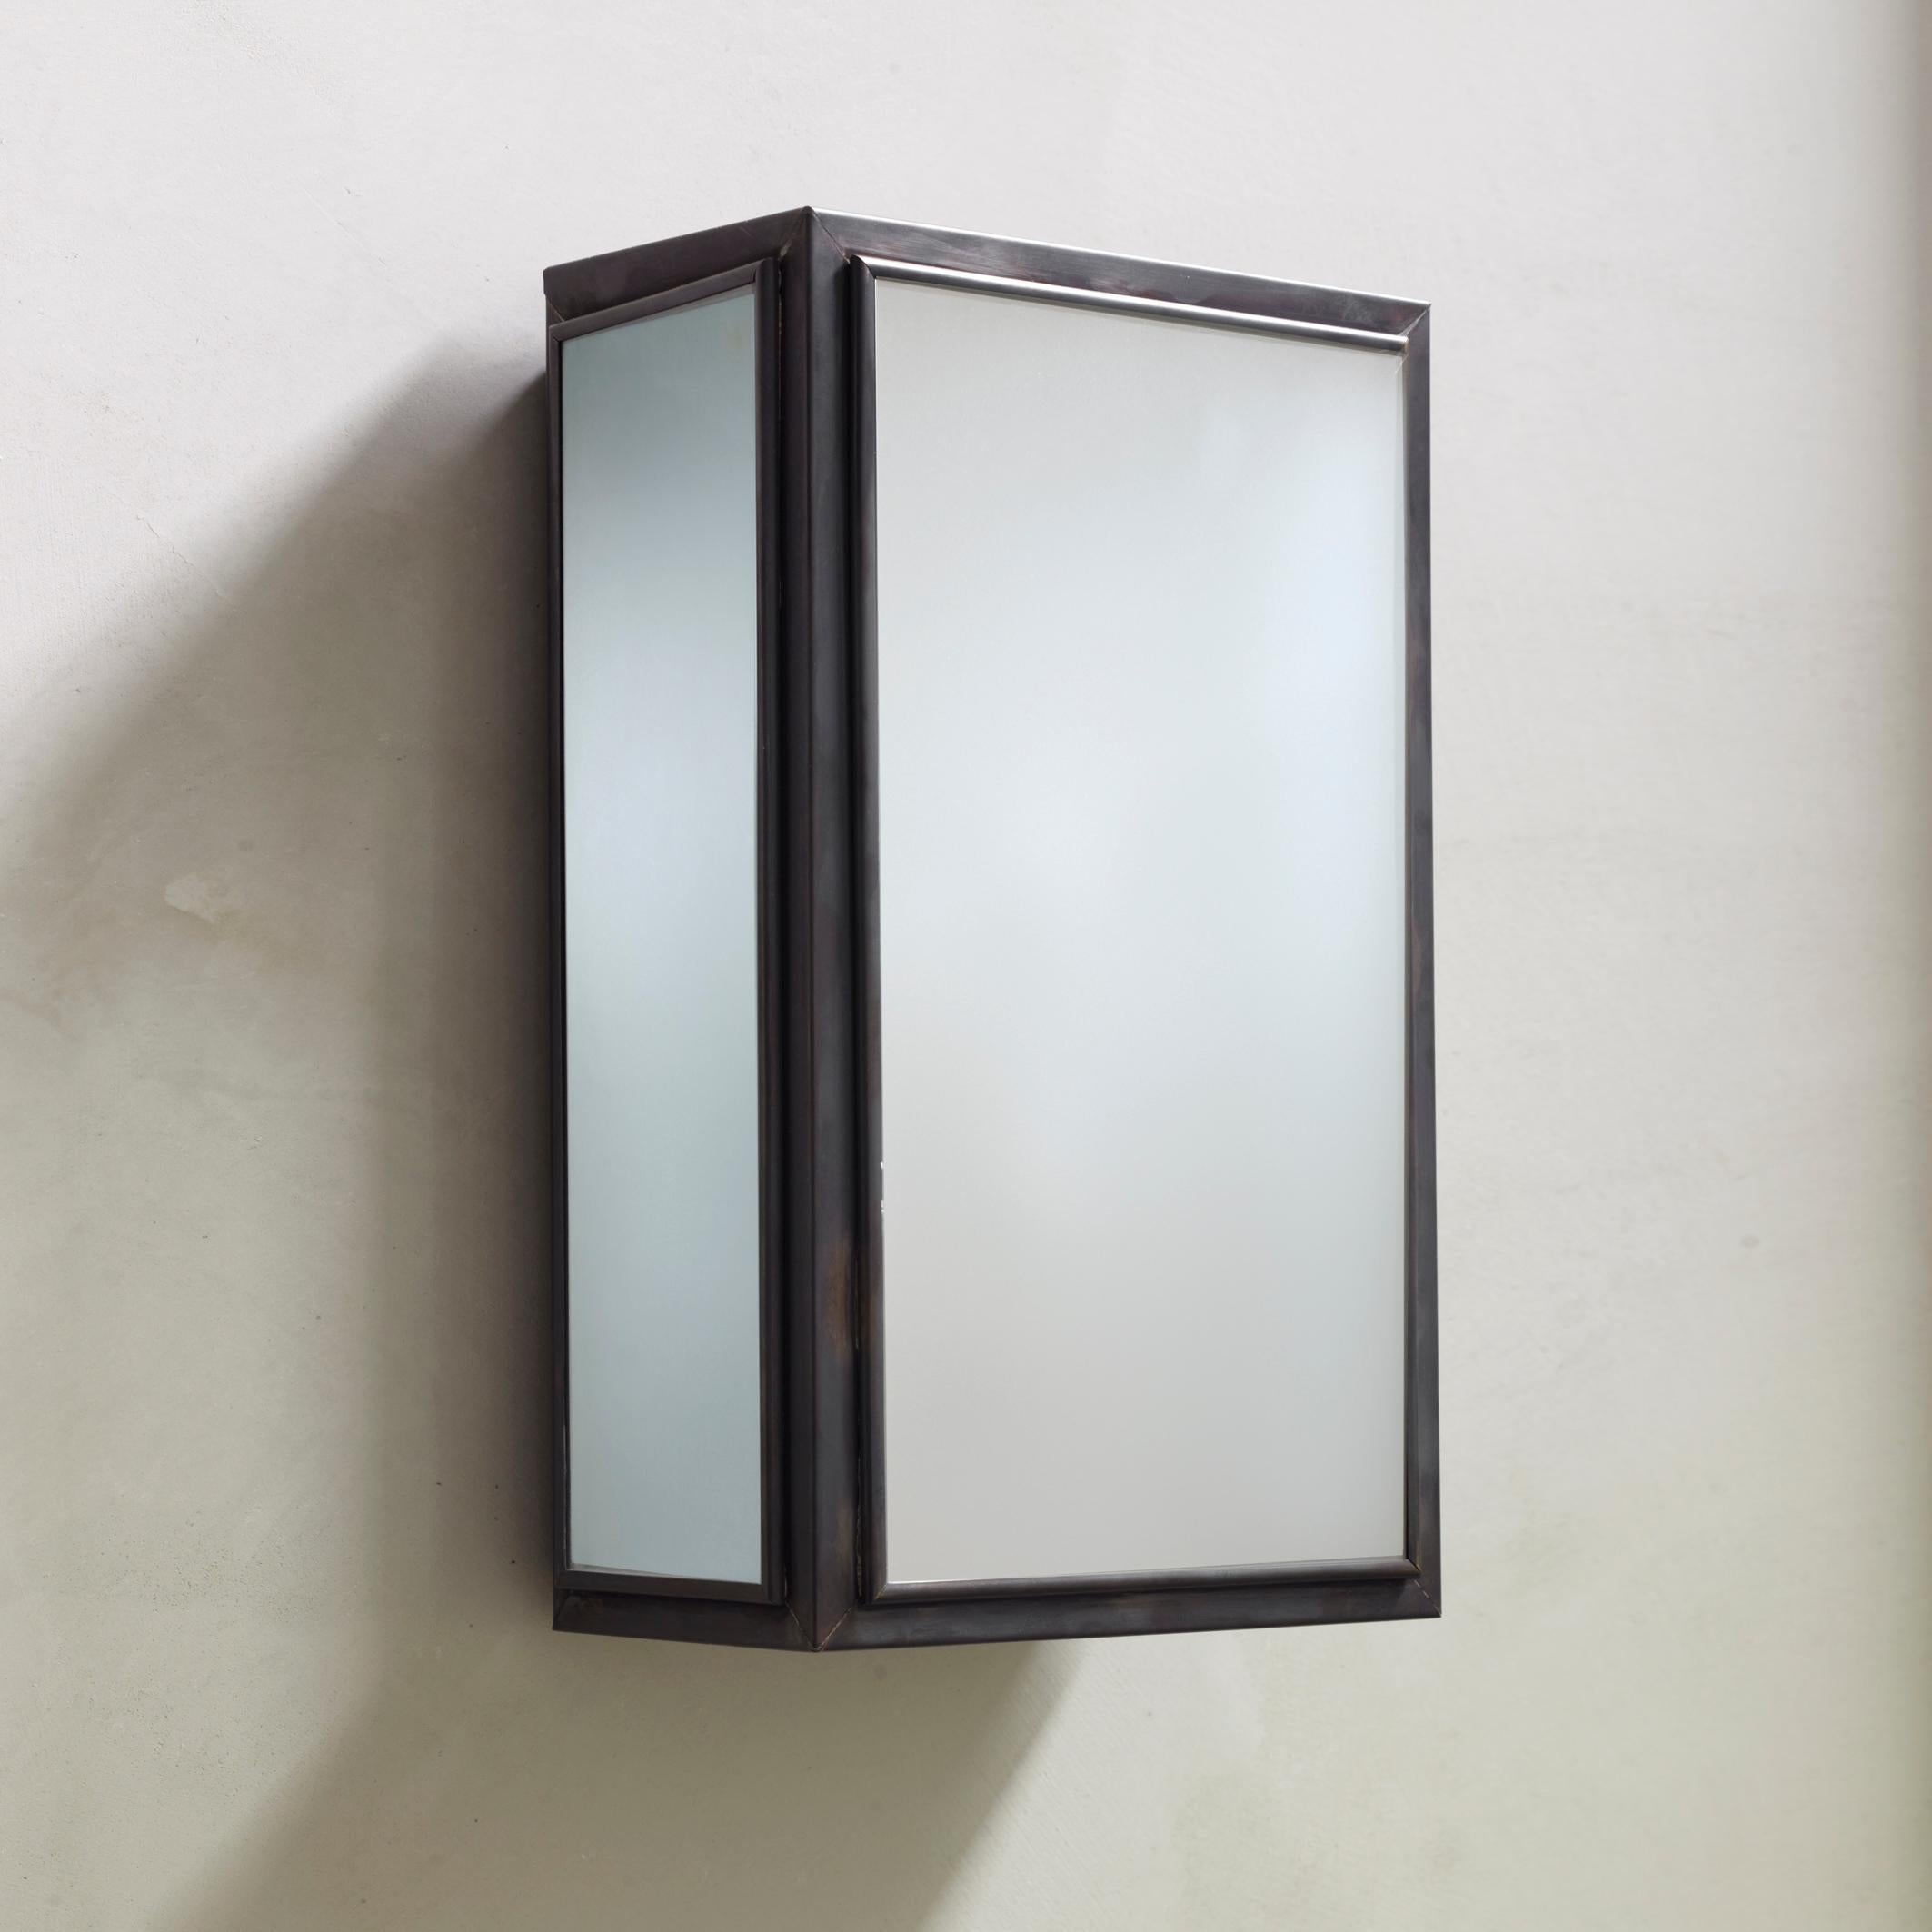 Frosted Tekna Essex-C Wall Light in Jet Black For Sale